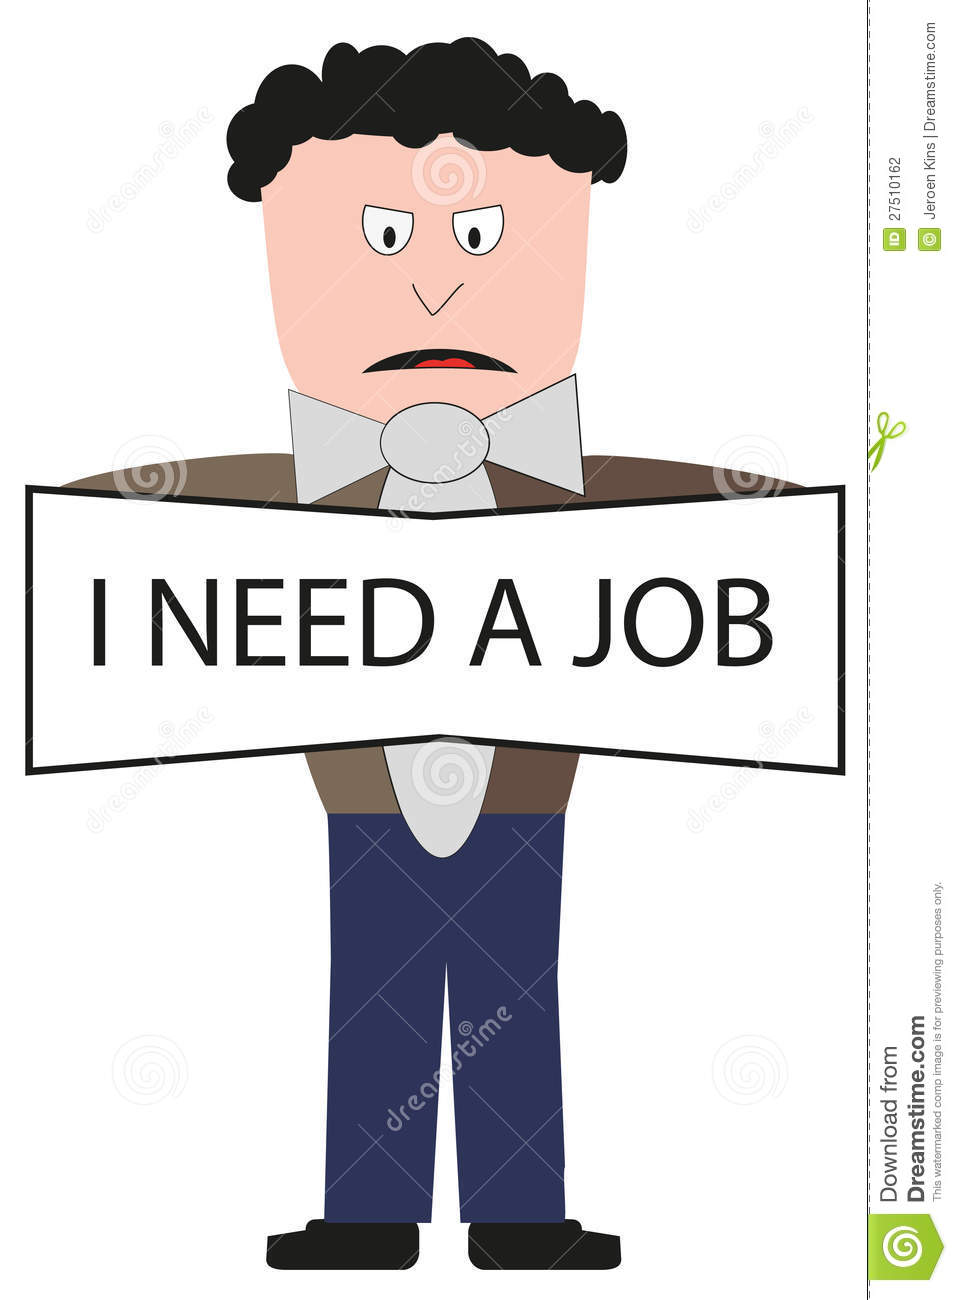 Man Looking For A Job   Holding An  I Need A Job  Sign